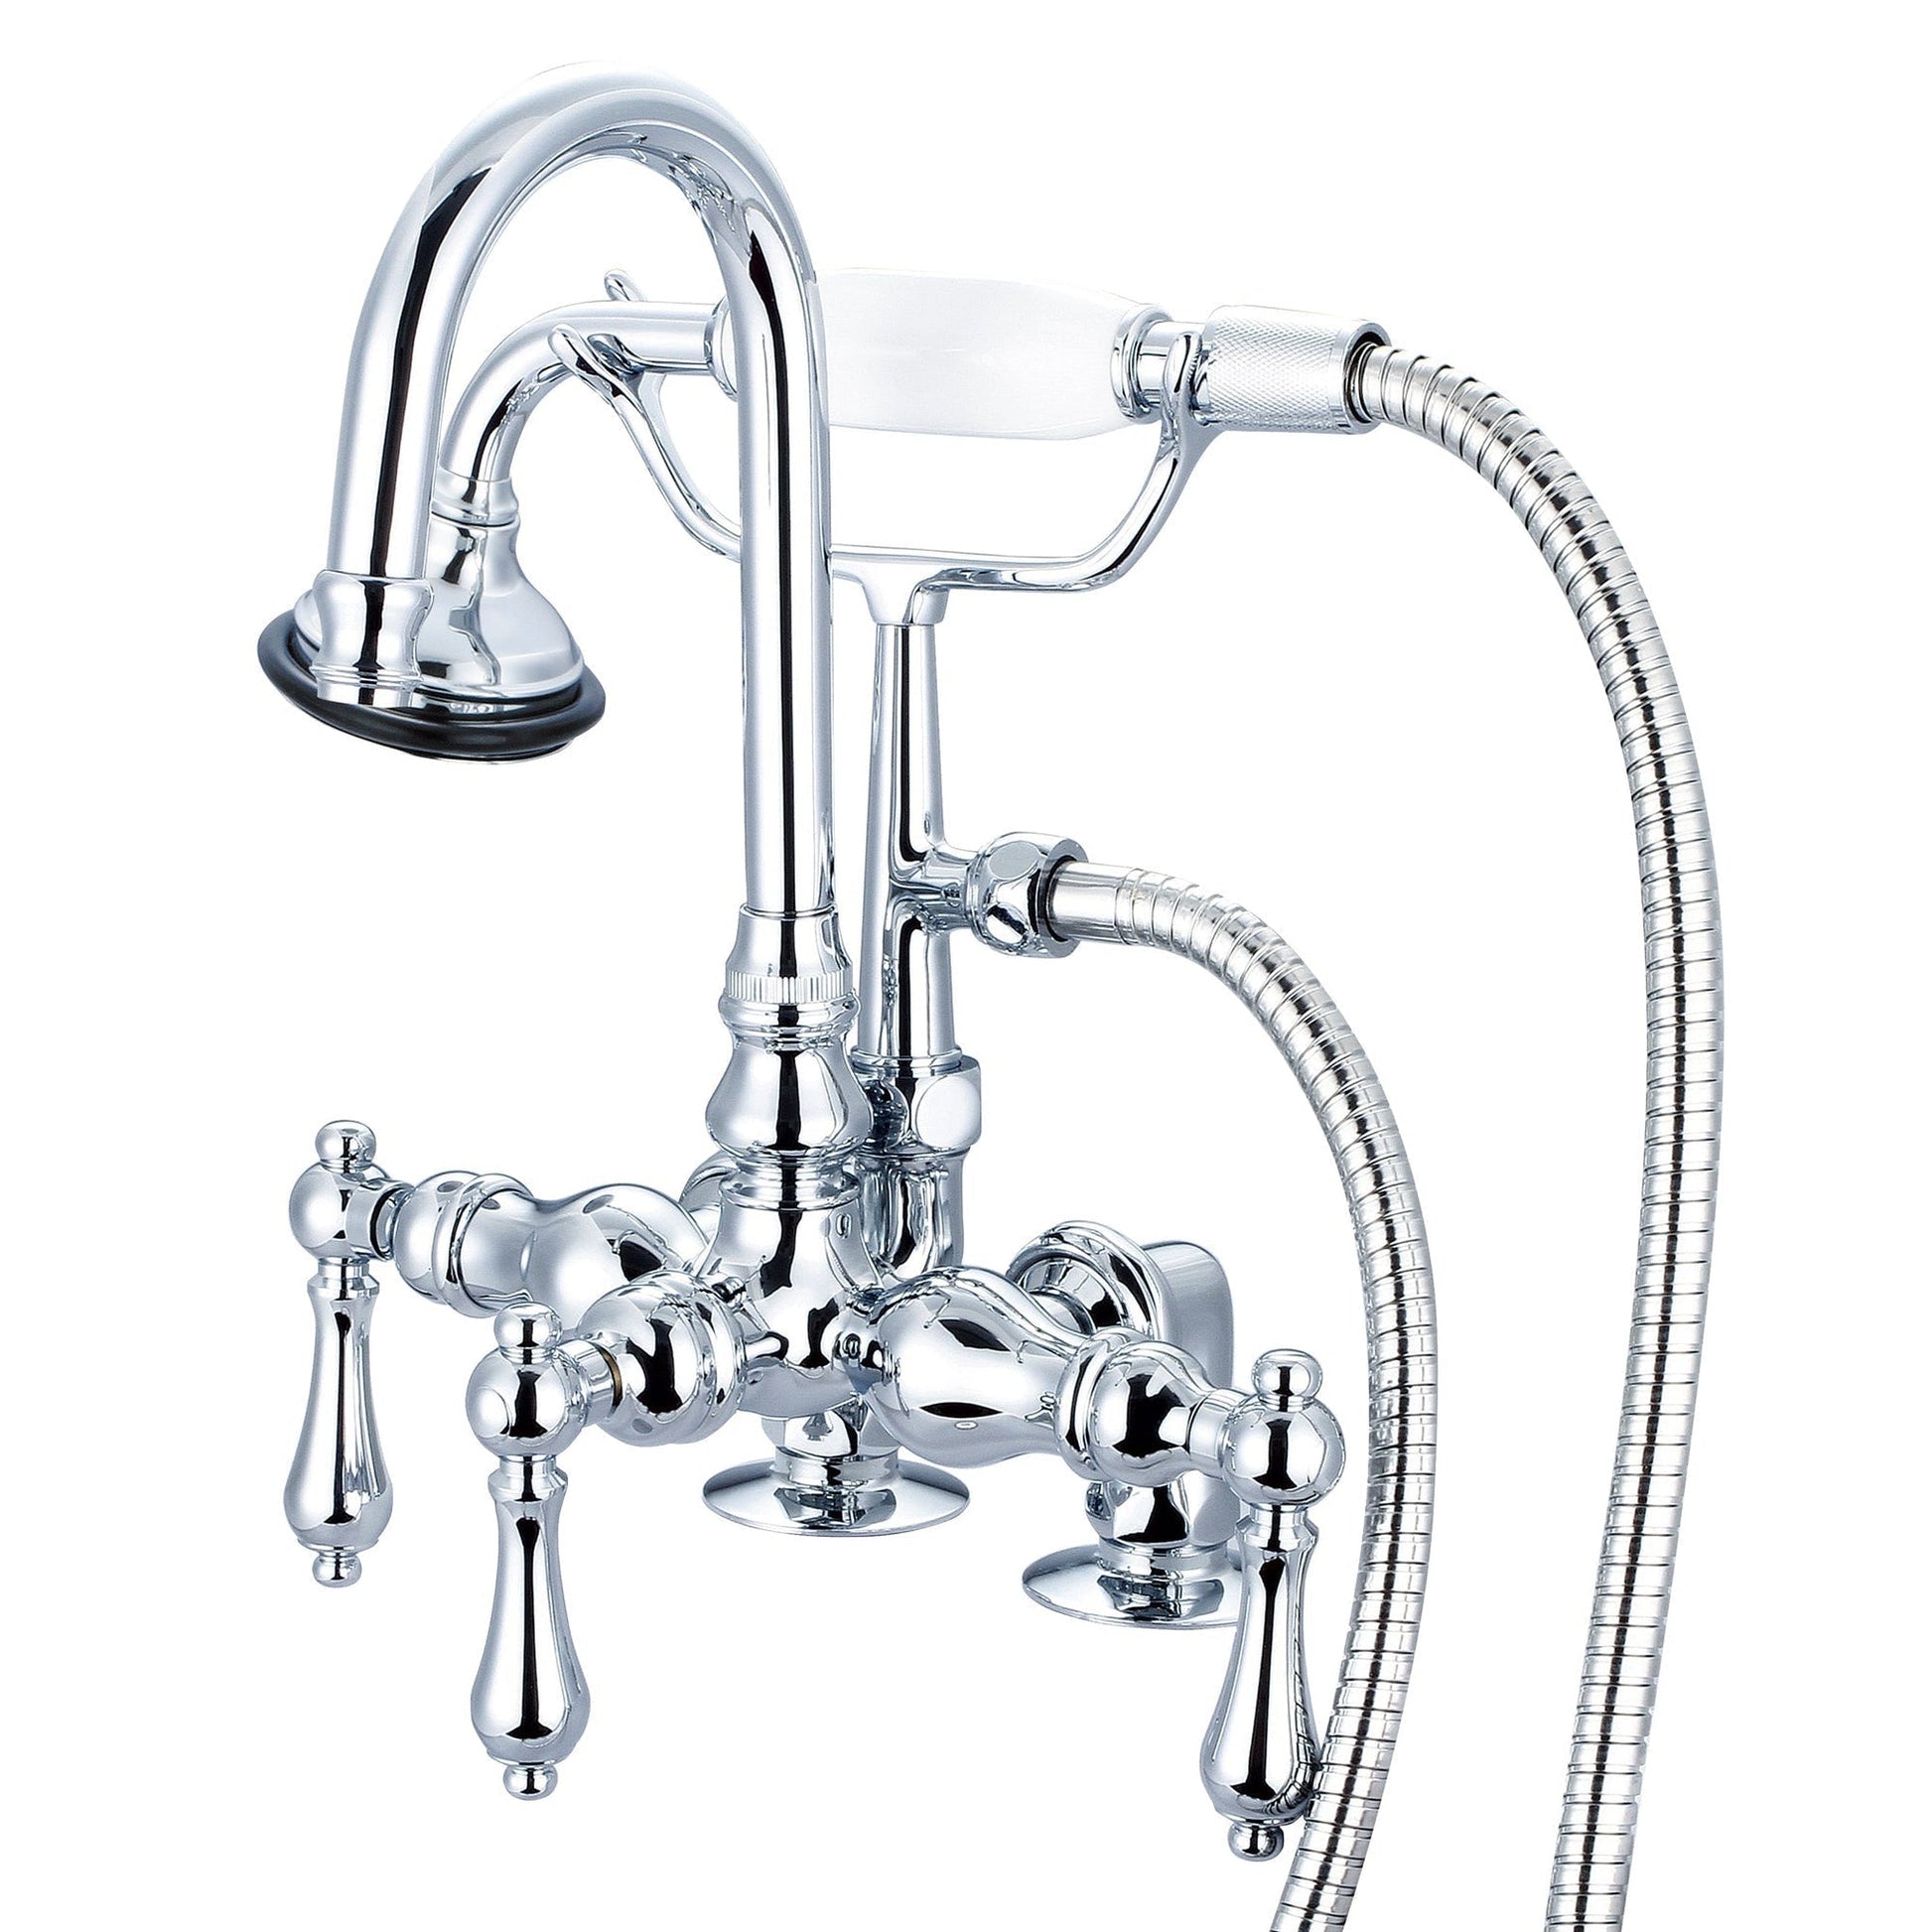 Water Creation Vintage Classic Center Deck Mount Tub F6-0013 9.25" Silver Solid Brass Faucet With Gooseneck Spout, 2-Inch Risers And Handheld Shower And Metal Lever Handles Without Labels